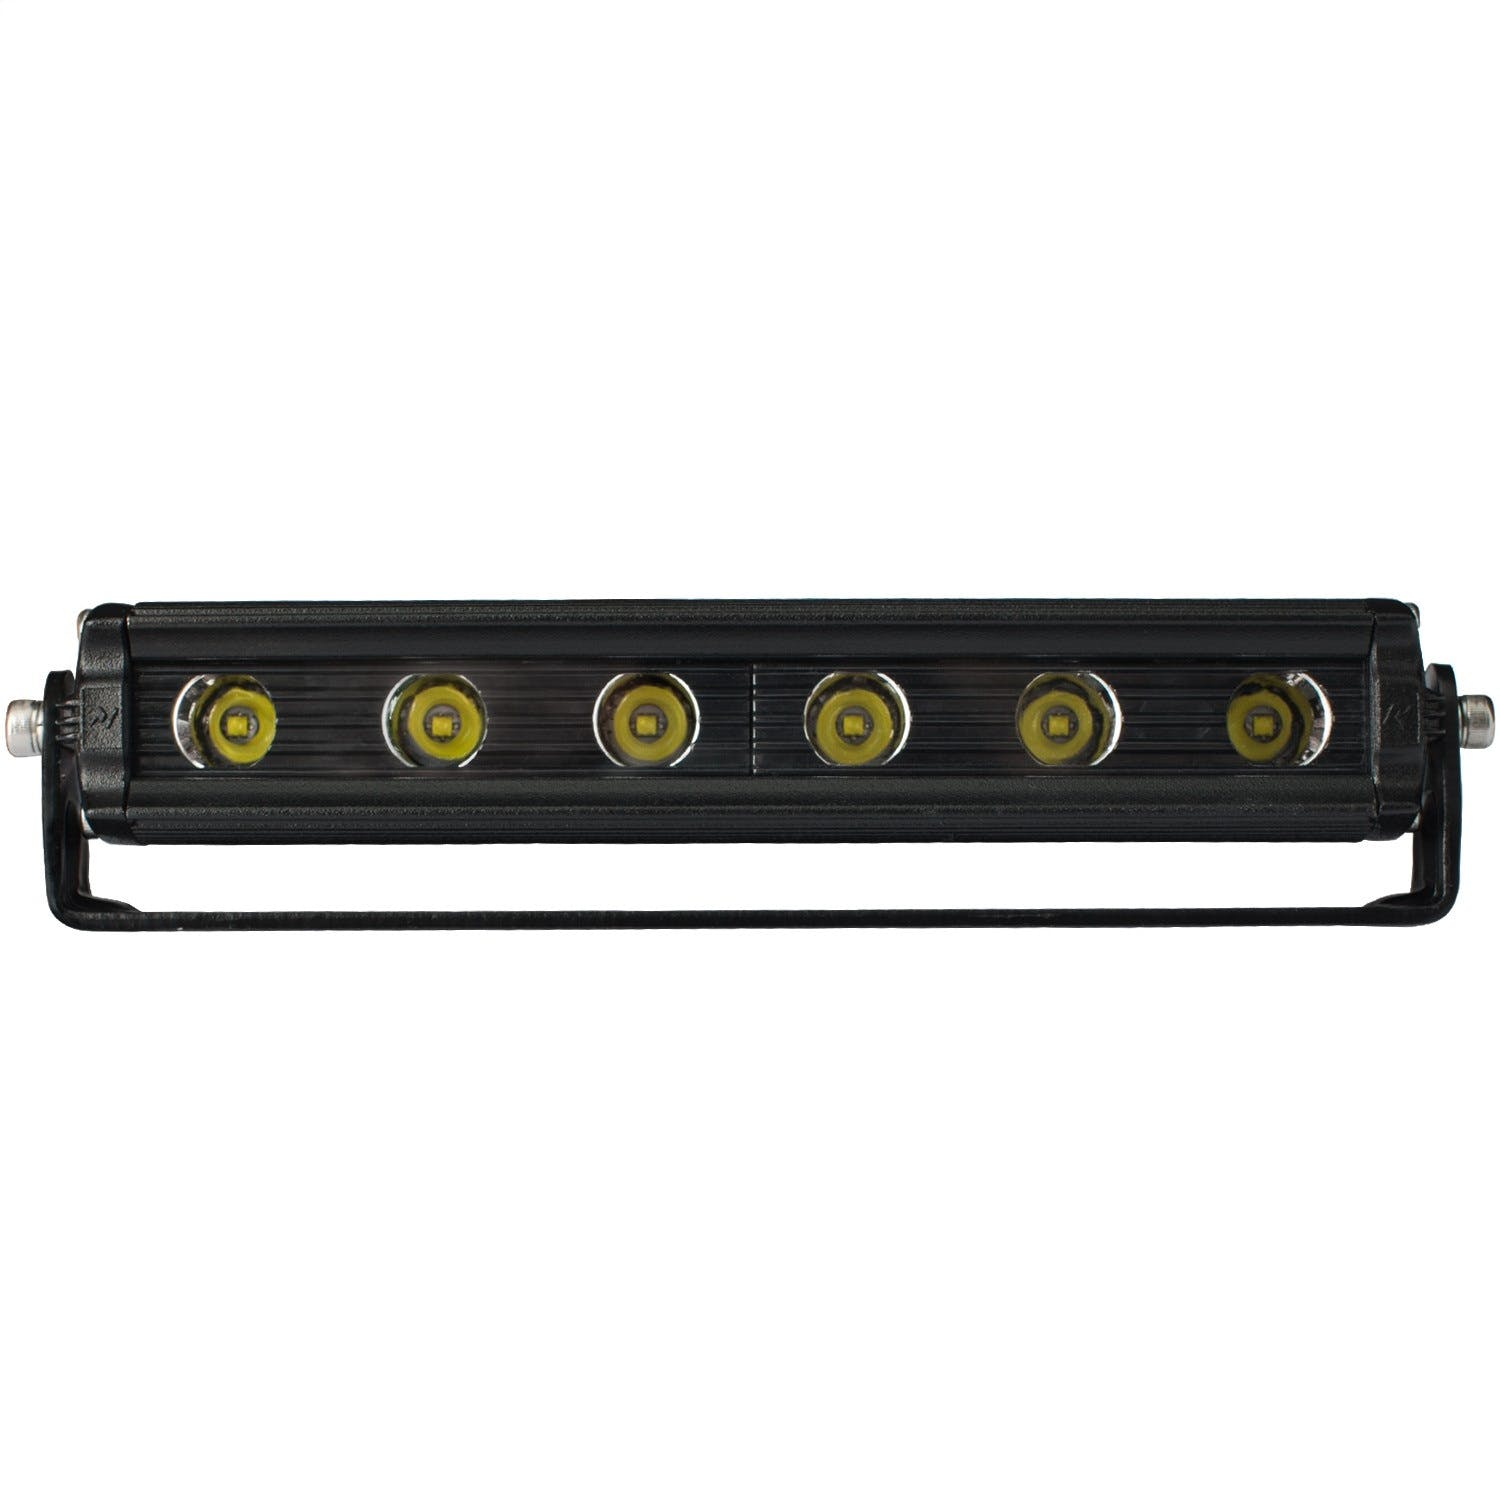 AnzoUSA 861172 Universal Clamp-on Back Up Light